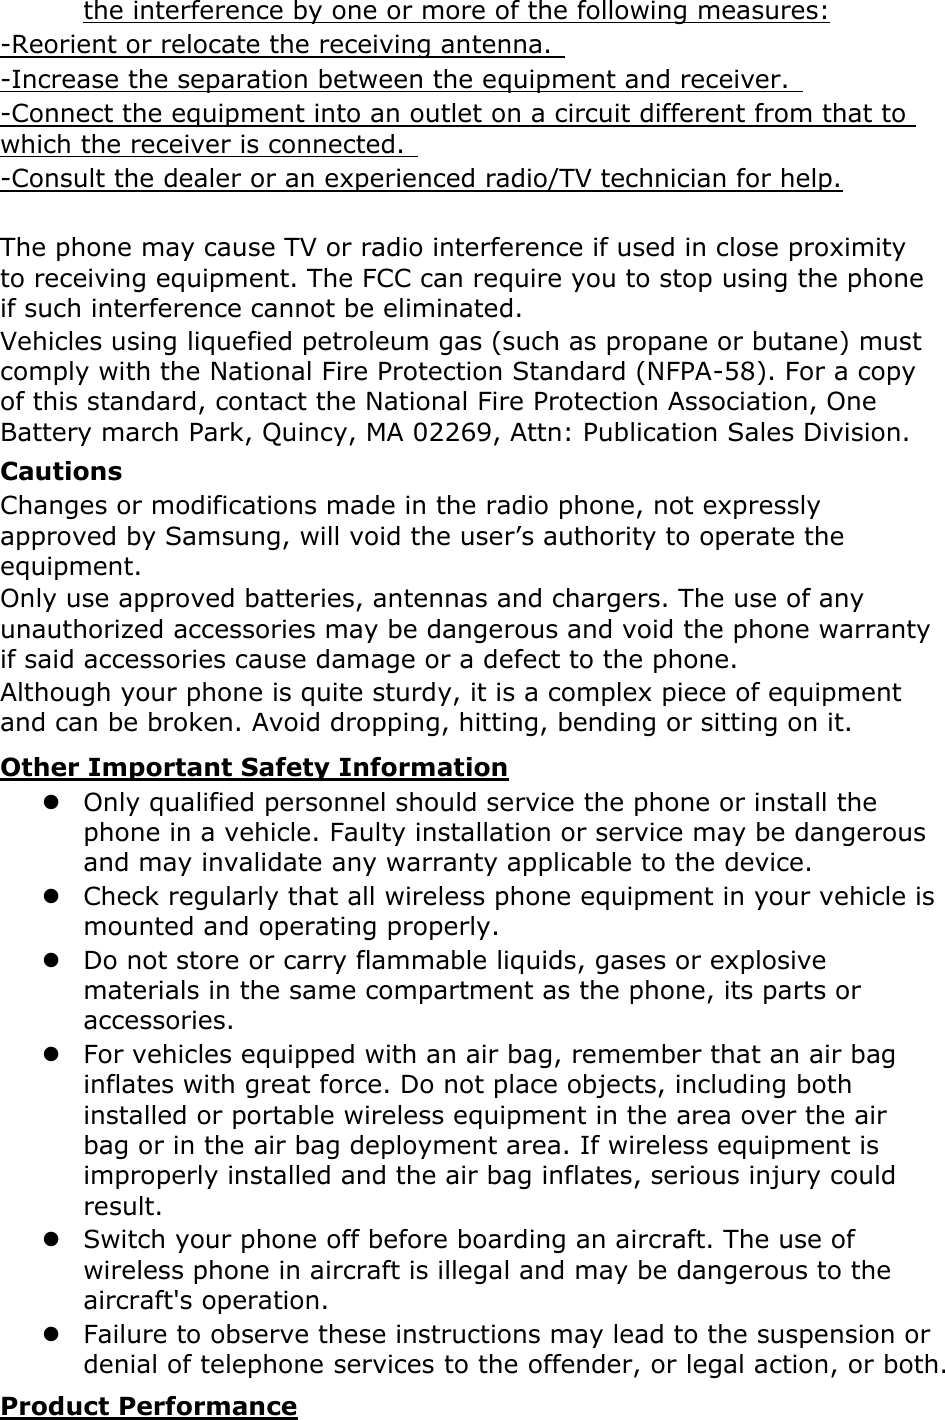 Page 17 of Samsung Electronics Co GTS3850 Cellular/PCS GSM Phone with WLAN and Bluetooth User Manual